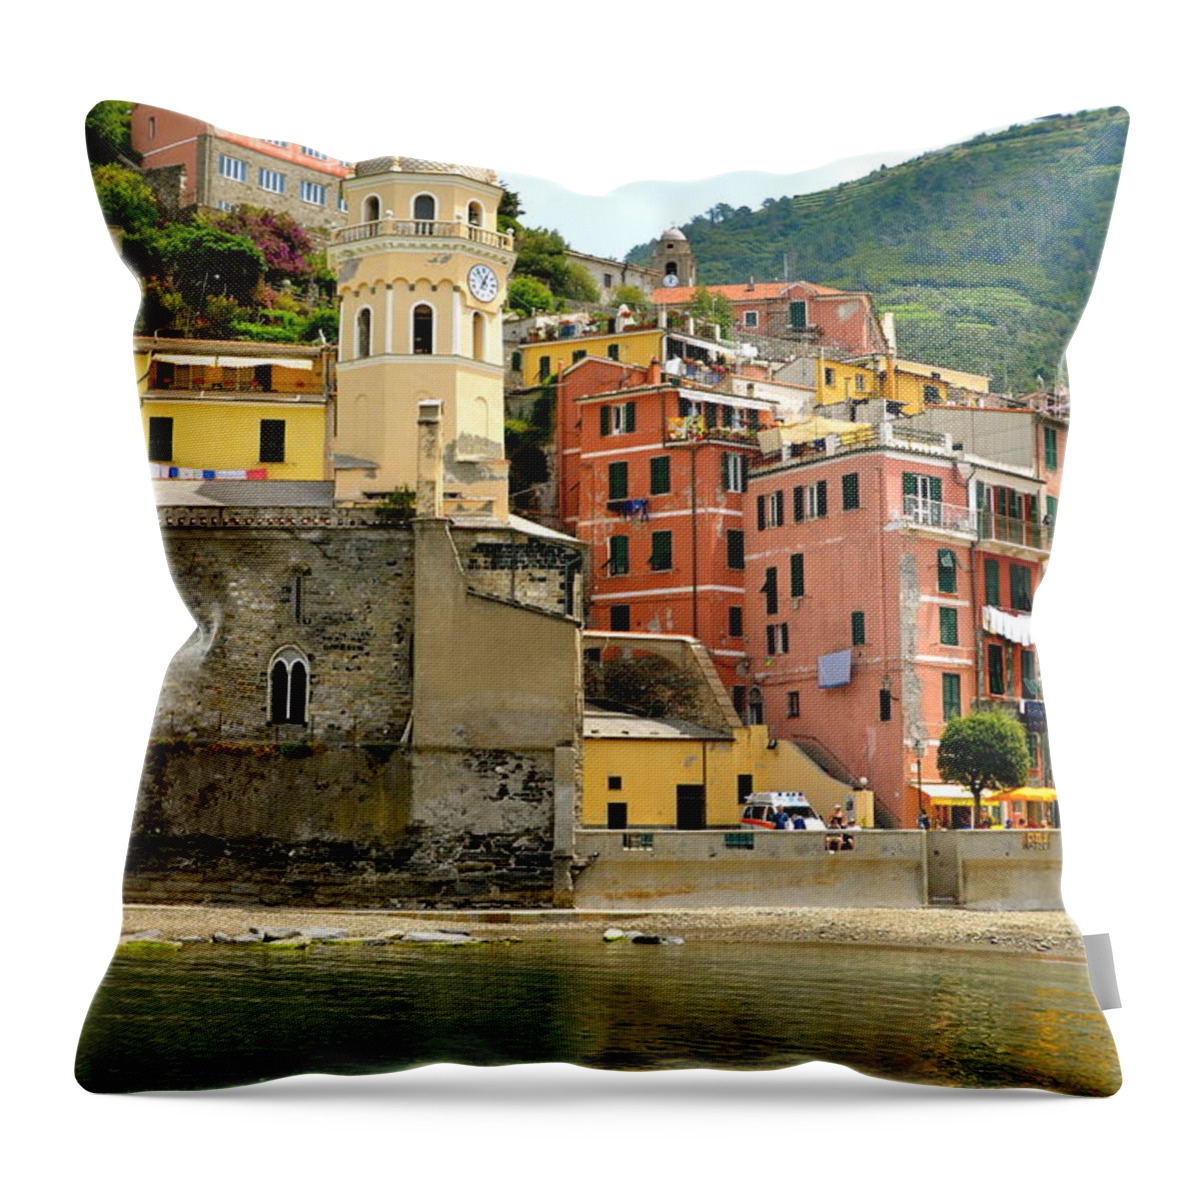 Vernazza Throw Pillow featuring the photograph Vernazza Bell Tower by Corinne Rhode